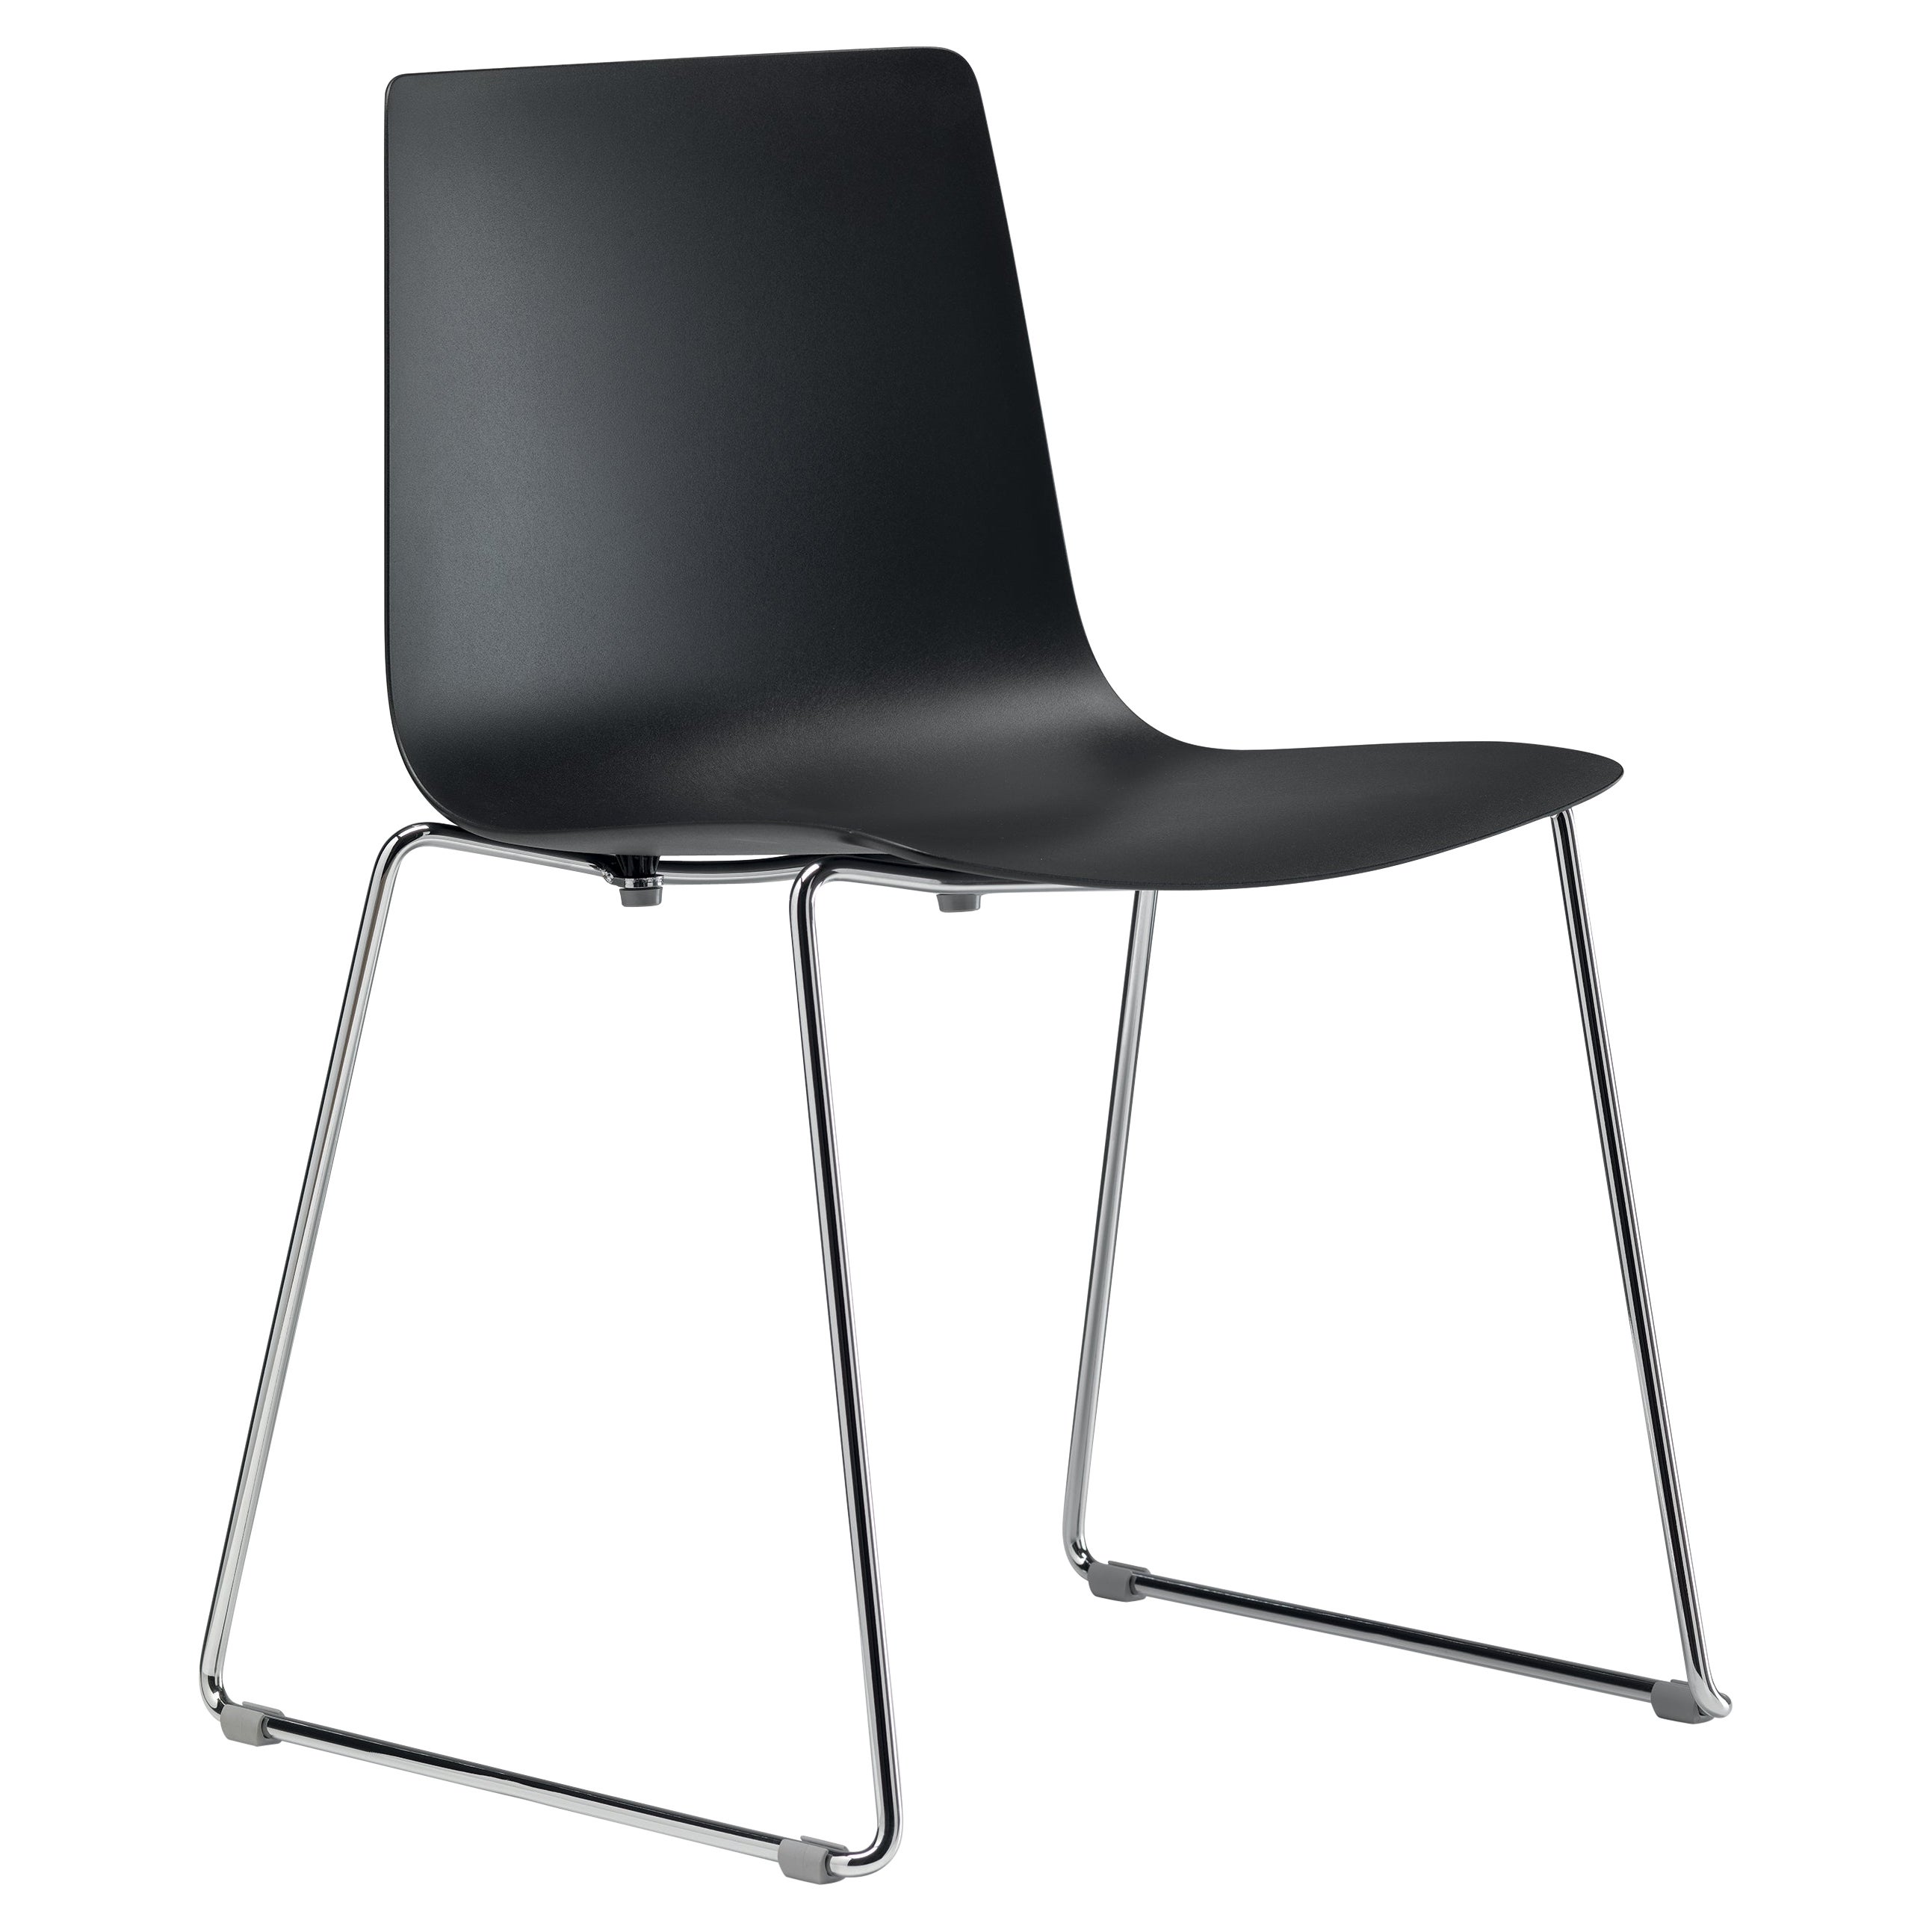 Alias 89A Slim Sledge Chair in Black Polypropylene Seat and Chromed Steel Frame For Sale